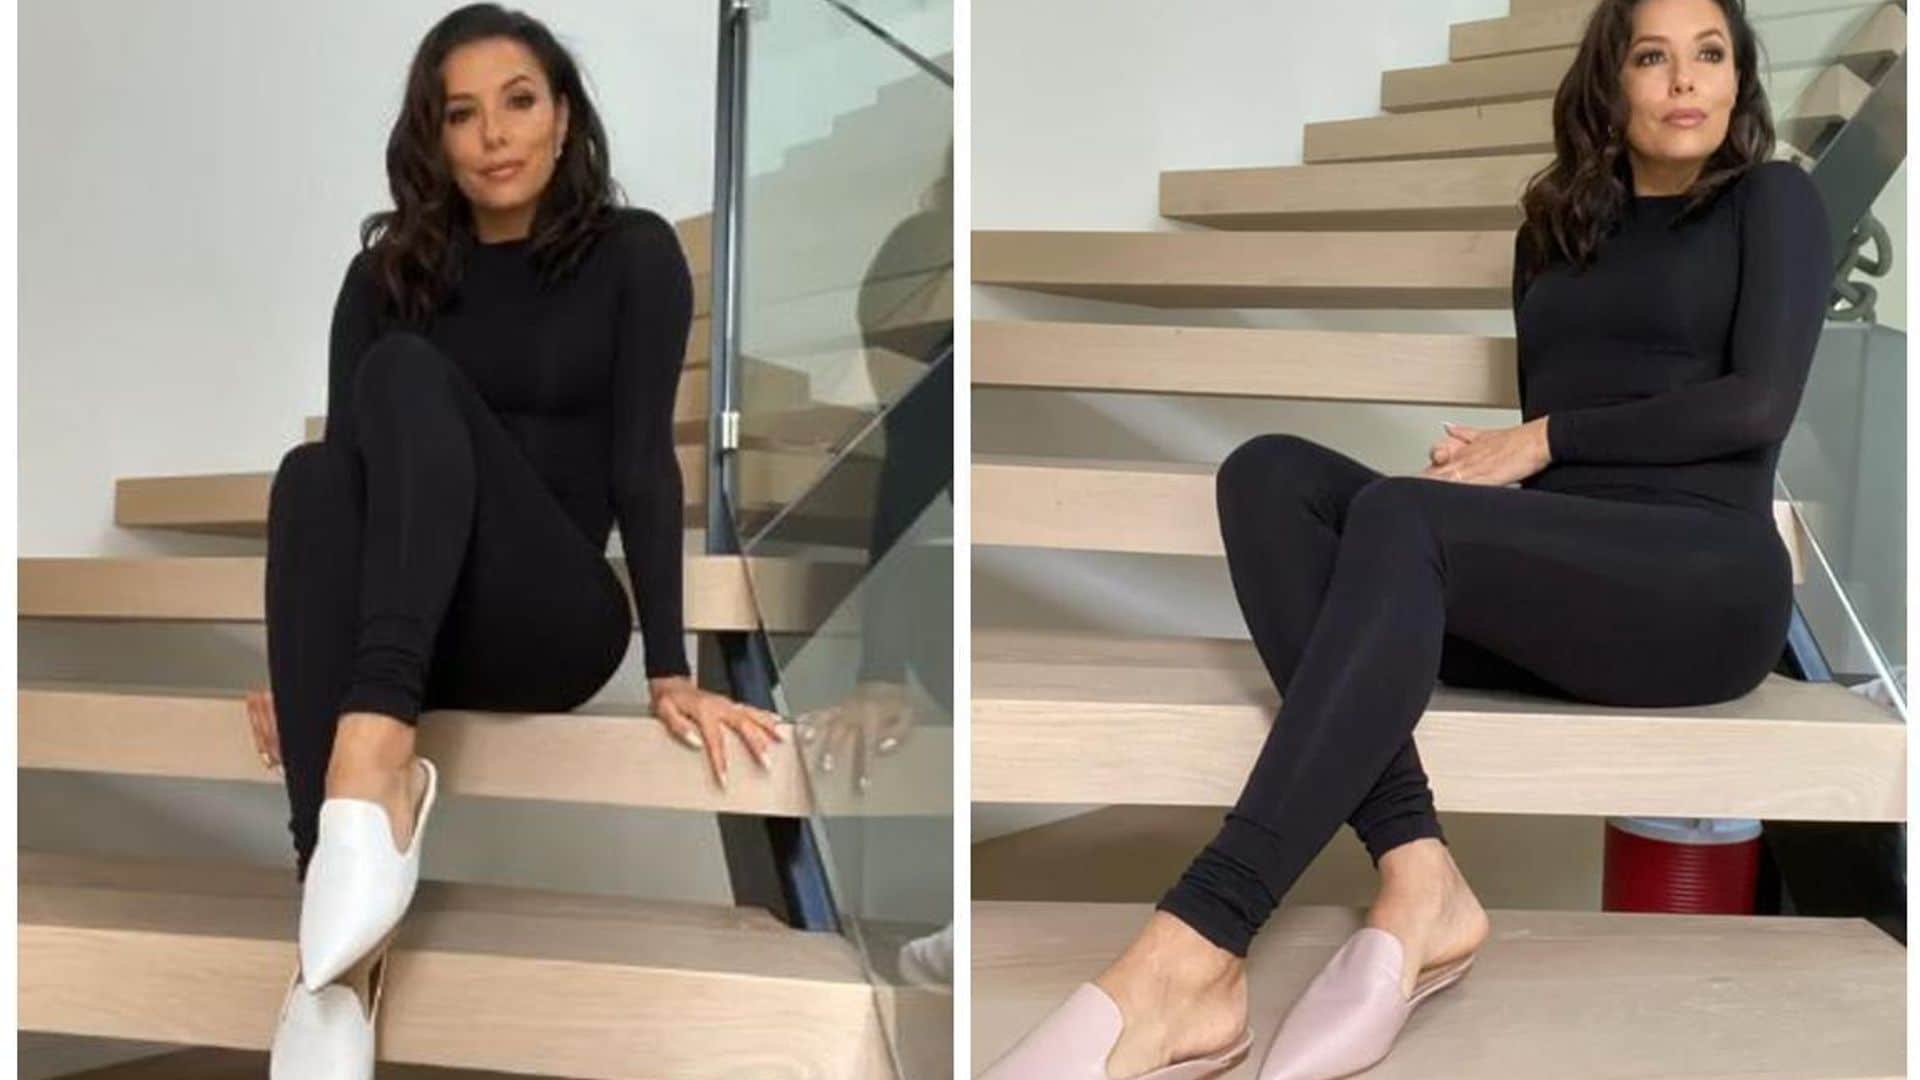 Eva Longoria collage with white shoes and black outfit